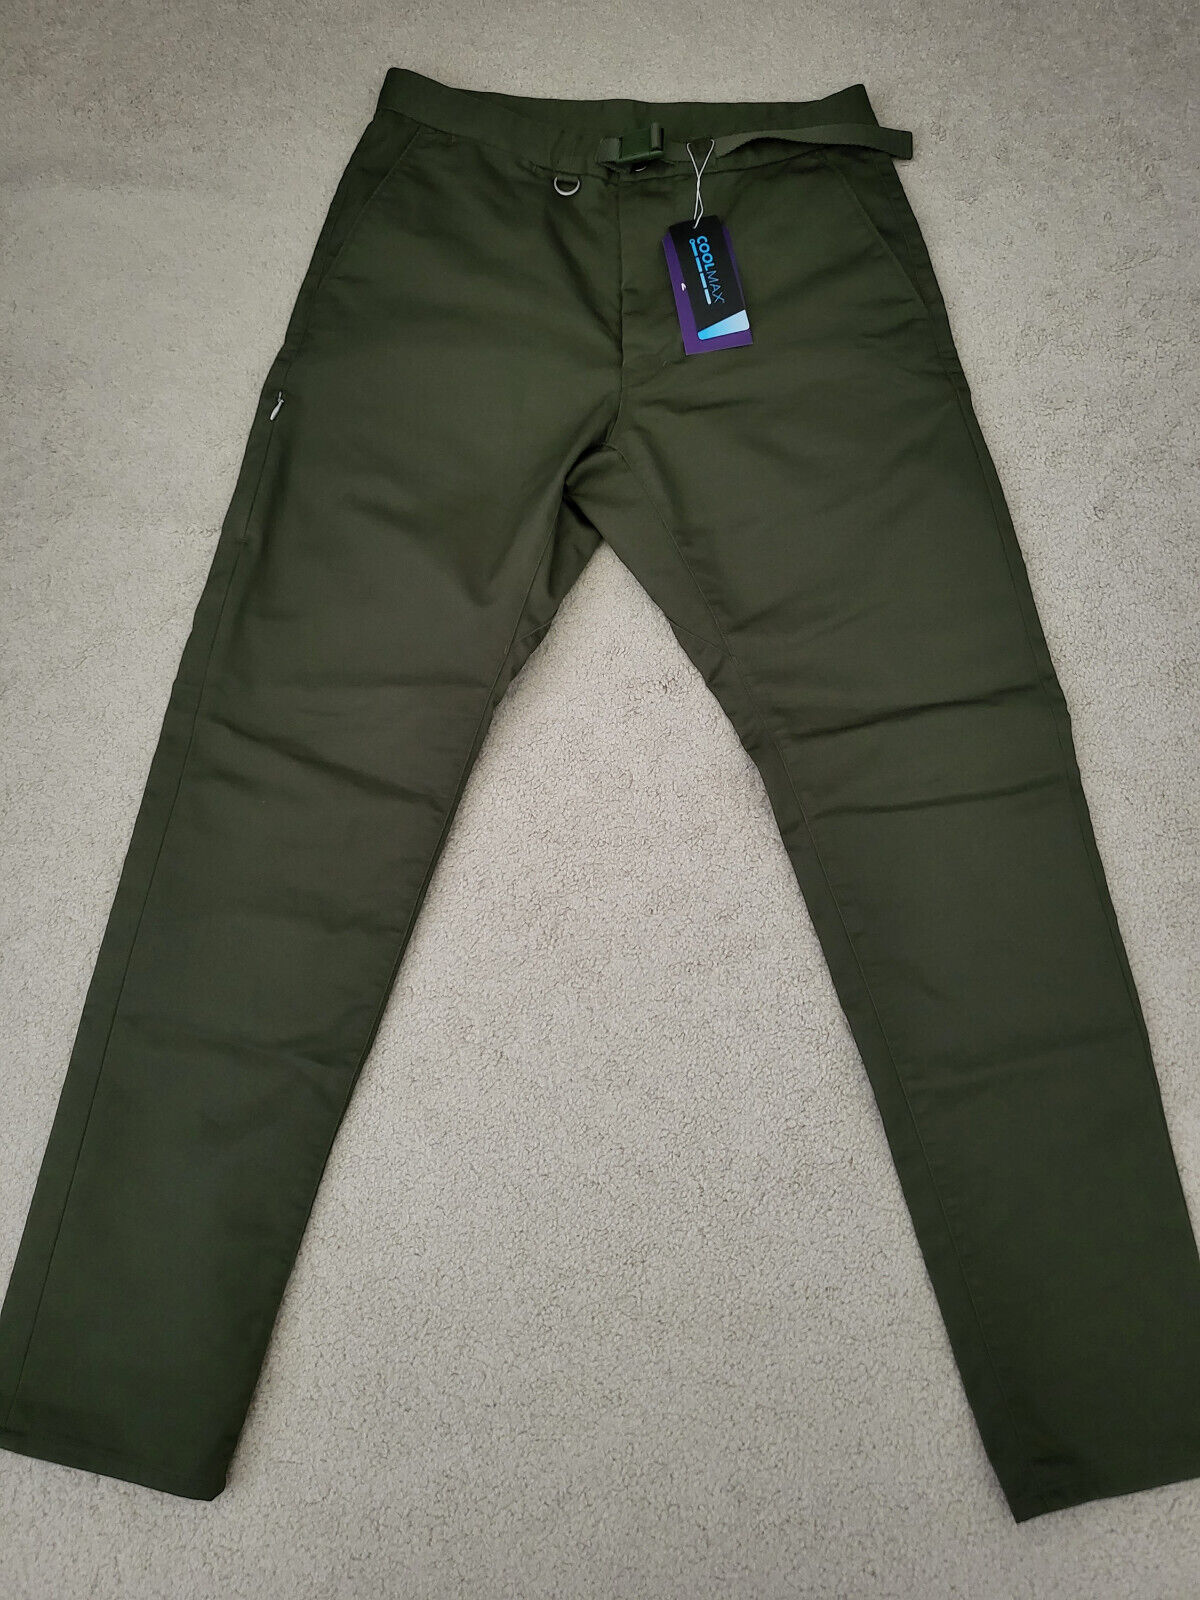 THE NORTH FACE PURPLE LABEL Stretch Twill Tapered Pants NT5051N 6047 SZ30